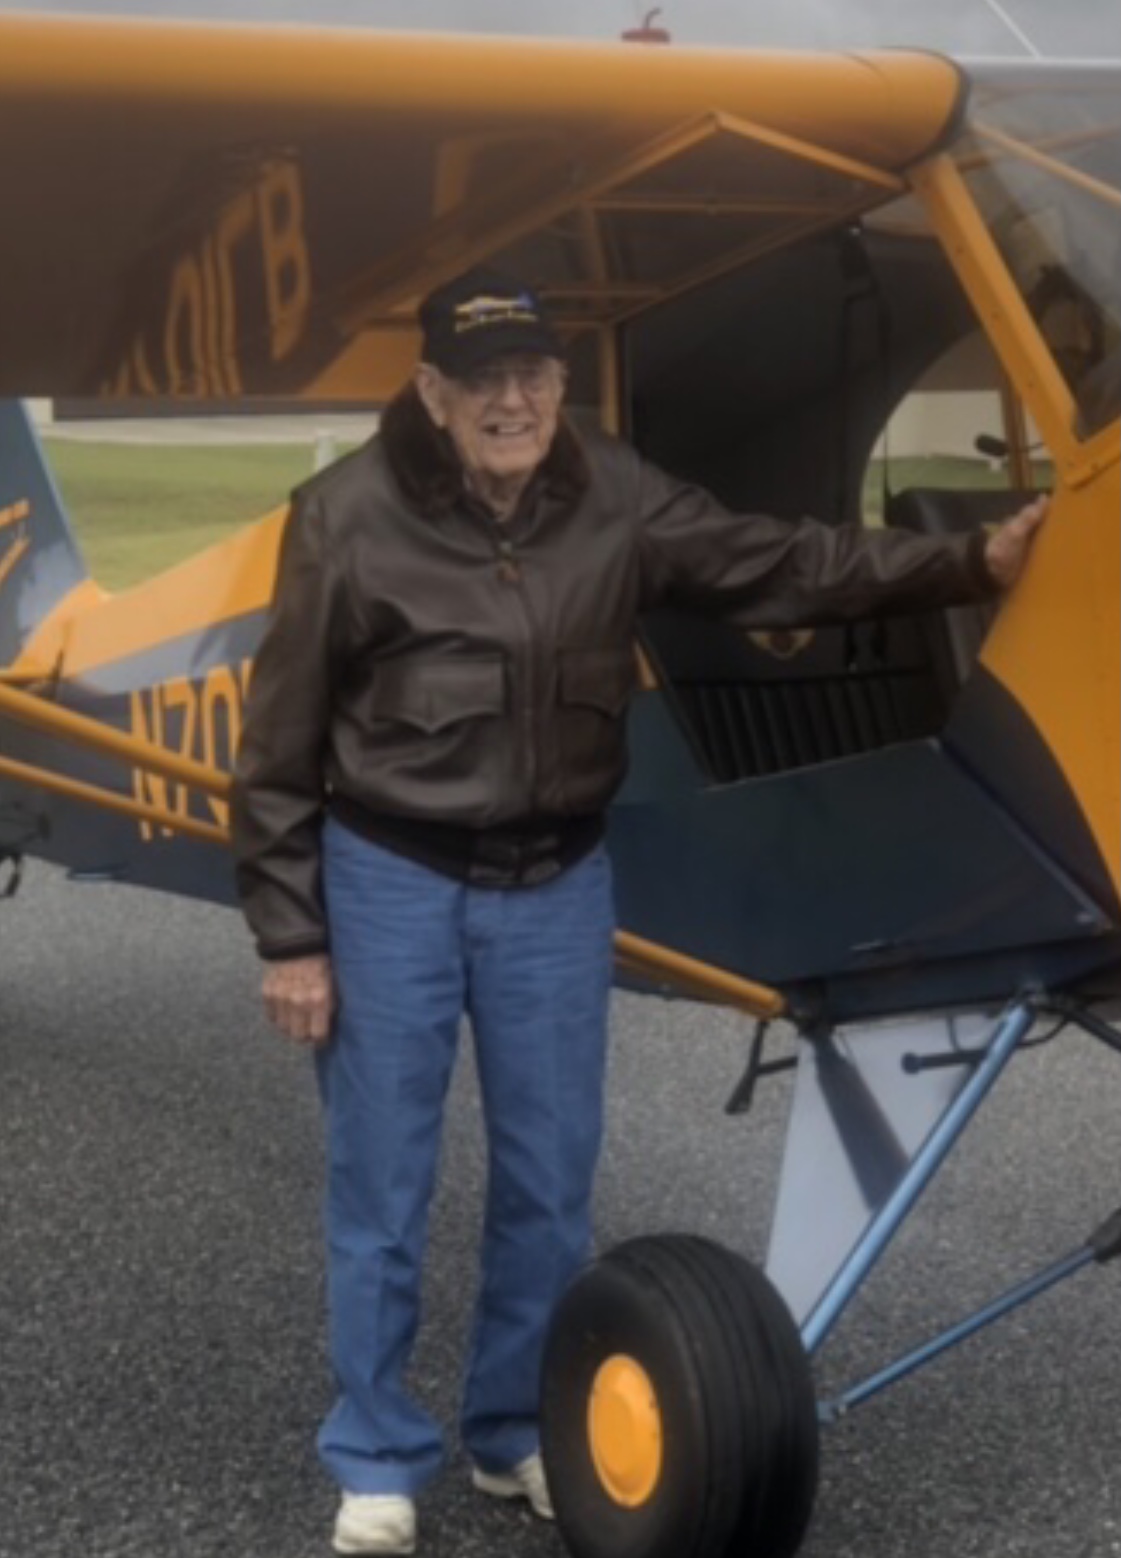 Hank getting ready to fly on his 100th Birthday in this beautiful Piper Cub